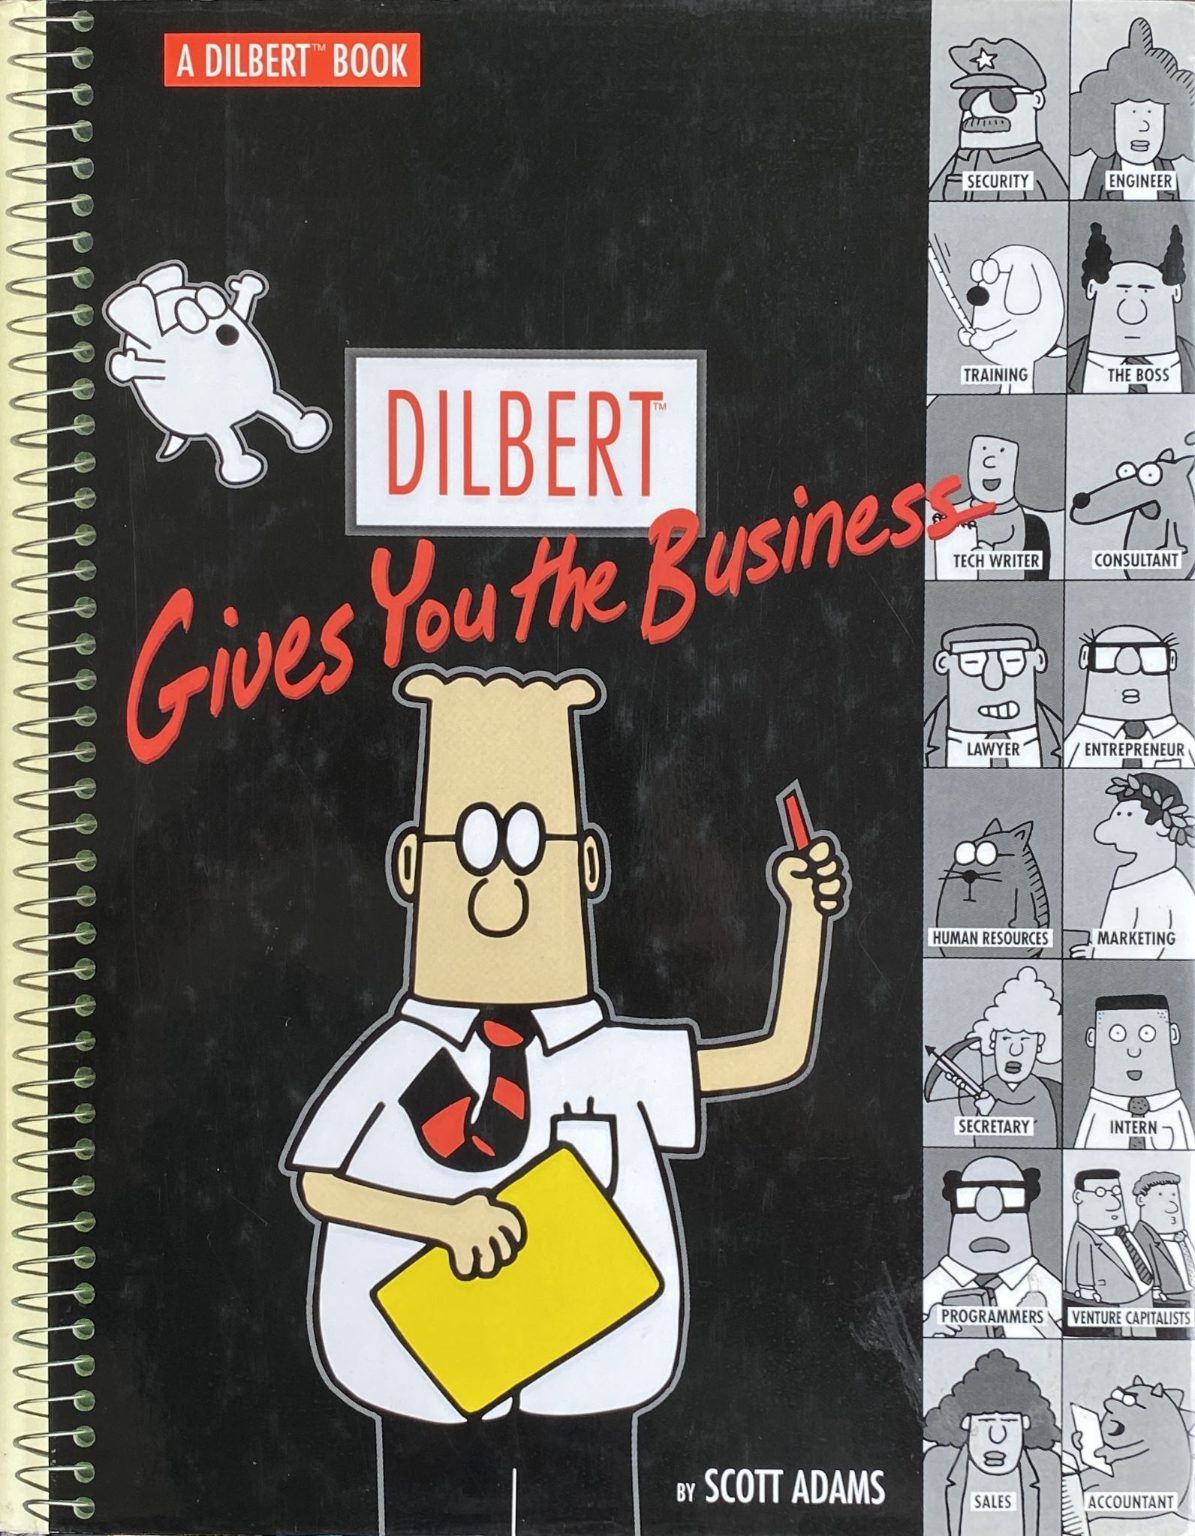 DILBERT GIVES YOU THE BUSINESS: A Dilbert Book